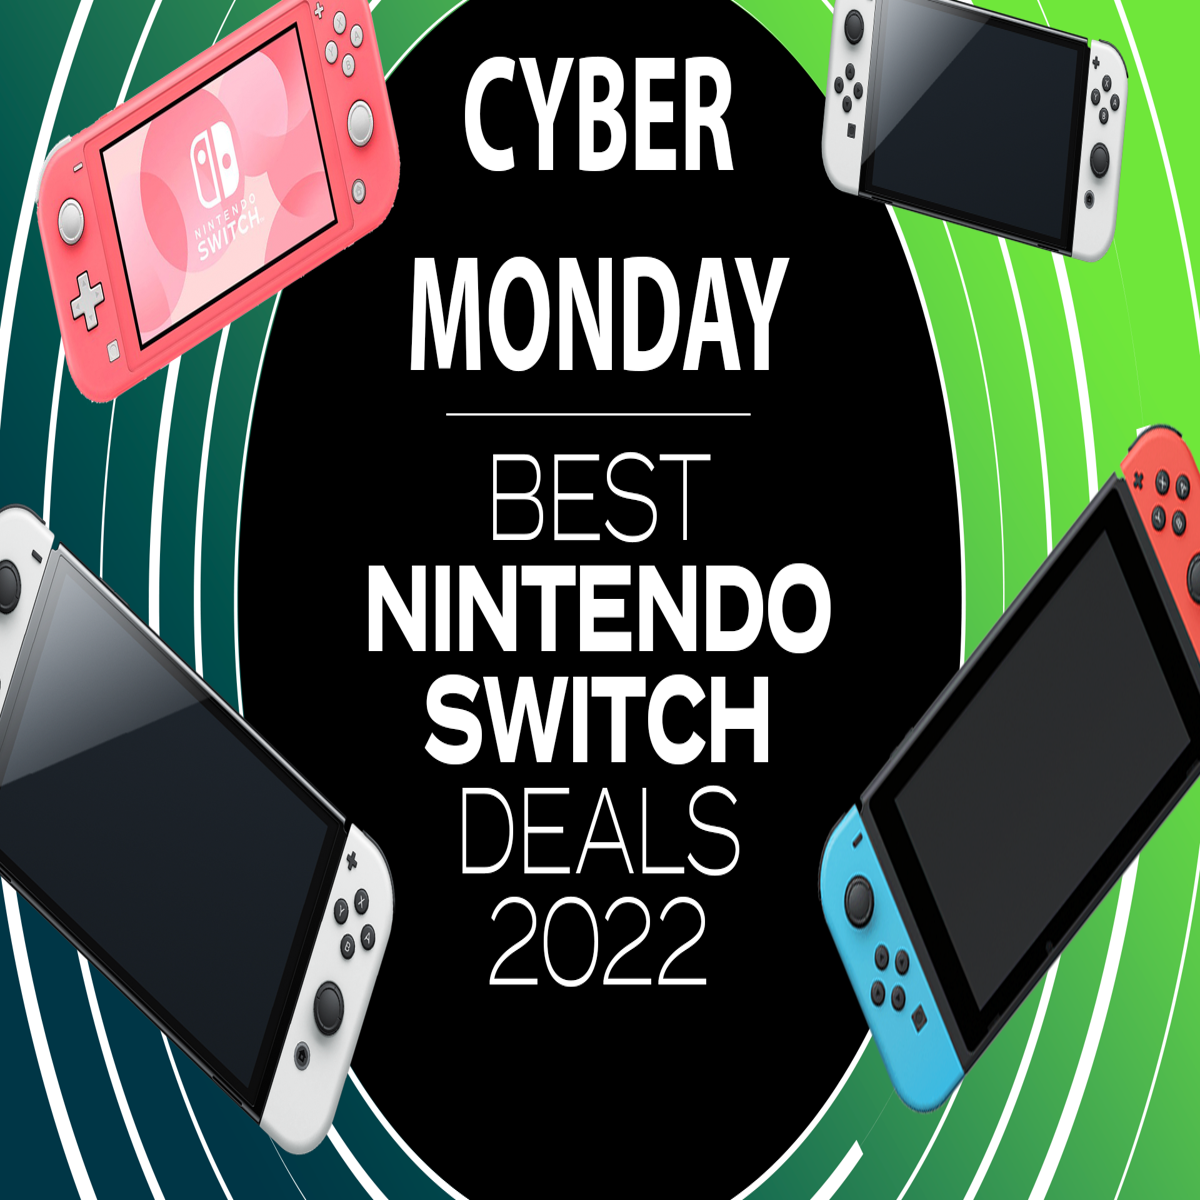 Best Nintendo Switch Cyber Monday Deals: Save On Exclusive Games